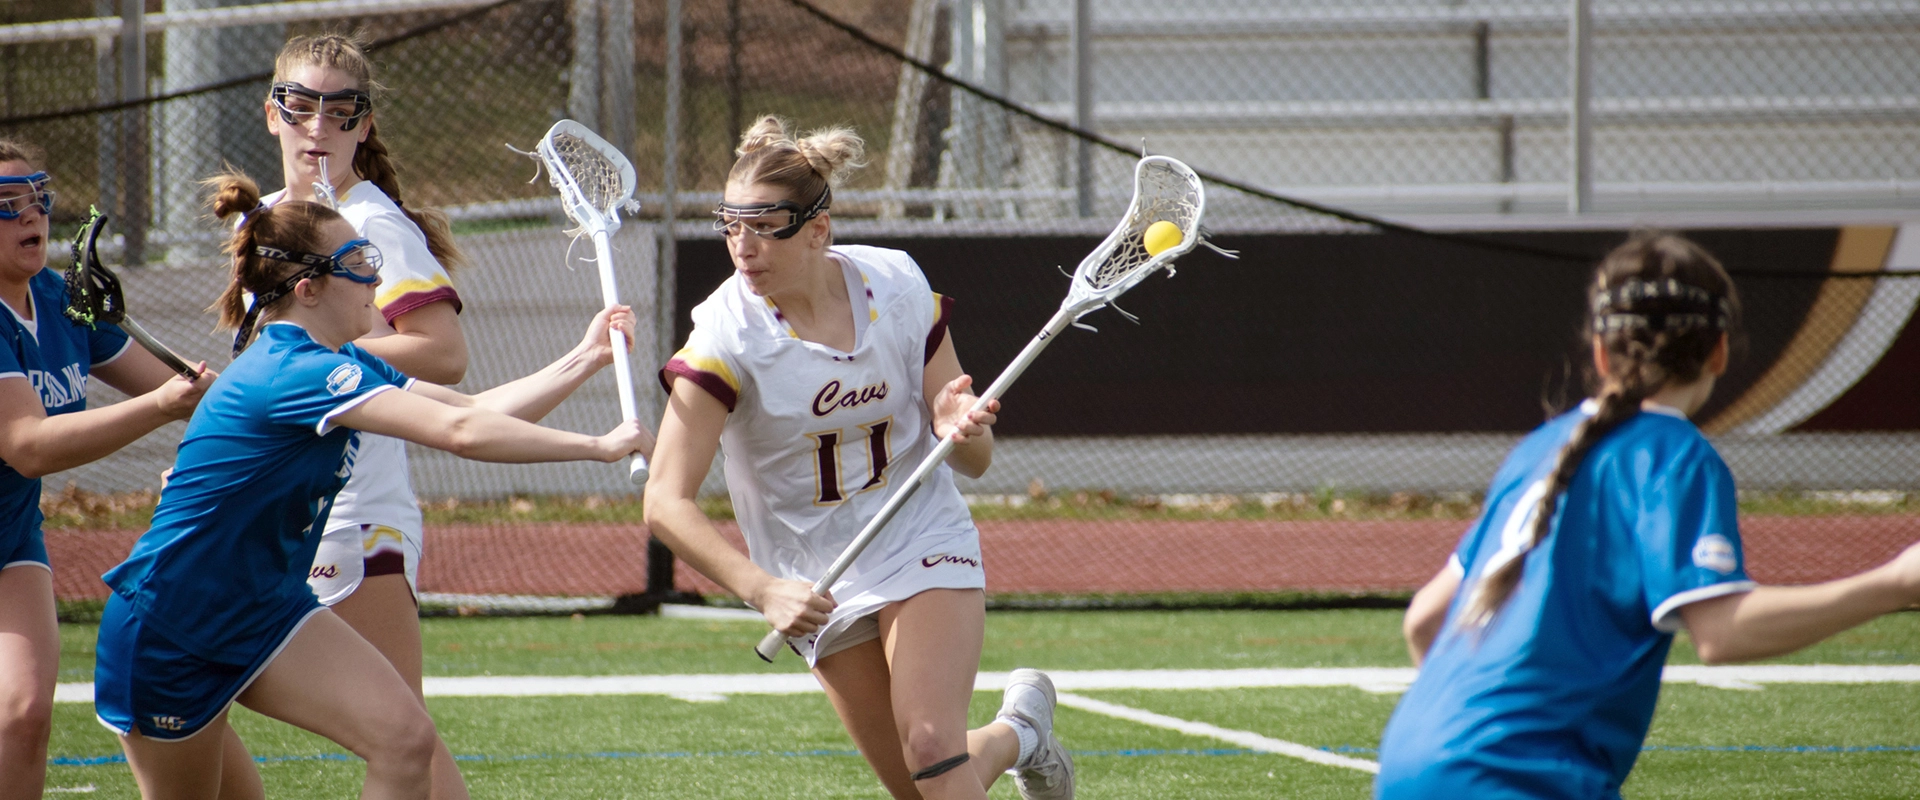 photo of the Walsh women's lacrosse team in action